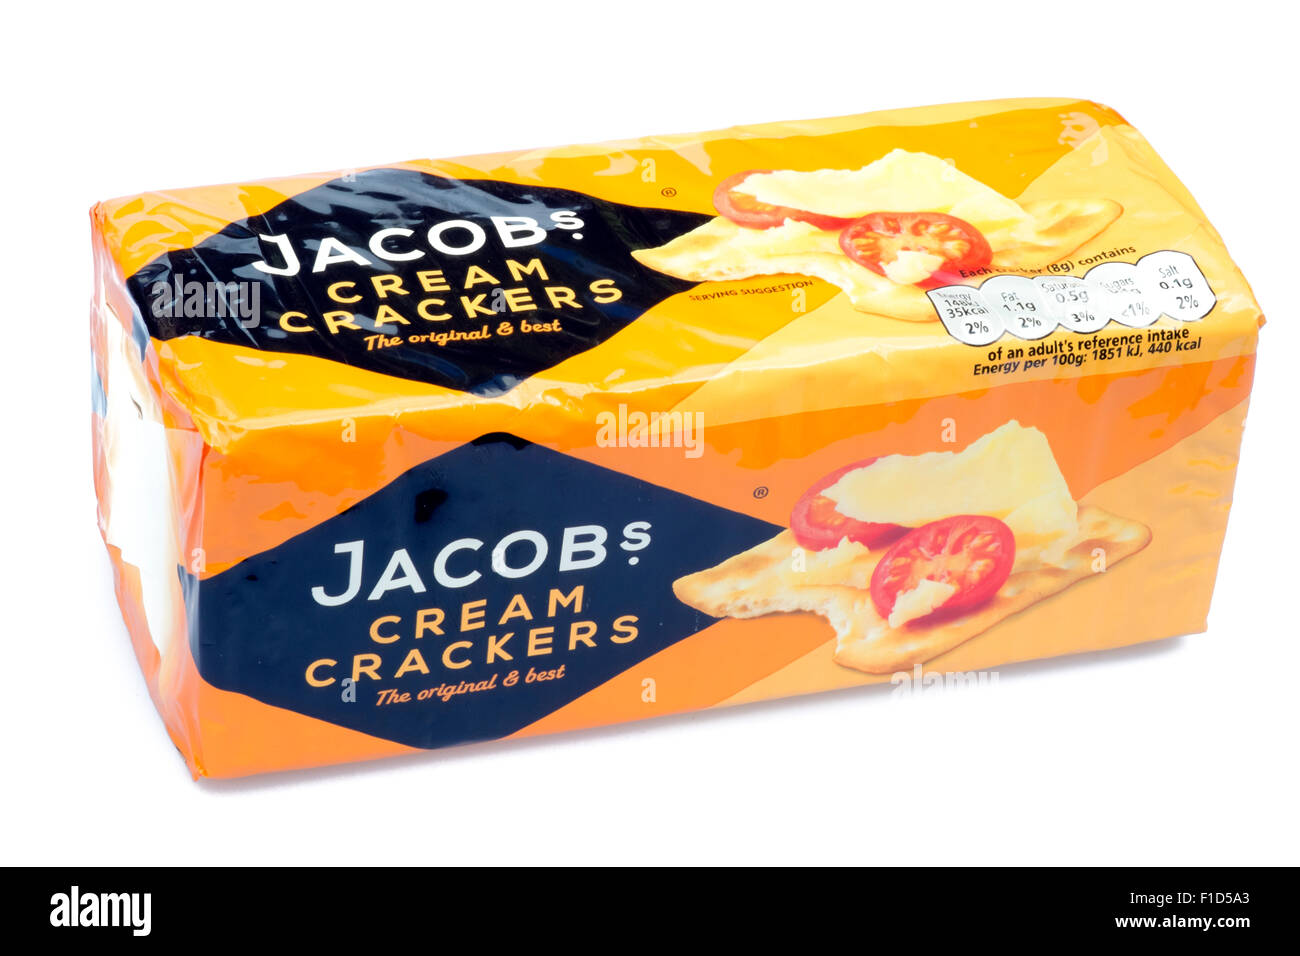 Jacob's Cream Crackers cut out or isolated against a white background, UK. Stock Photo